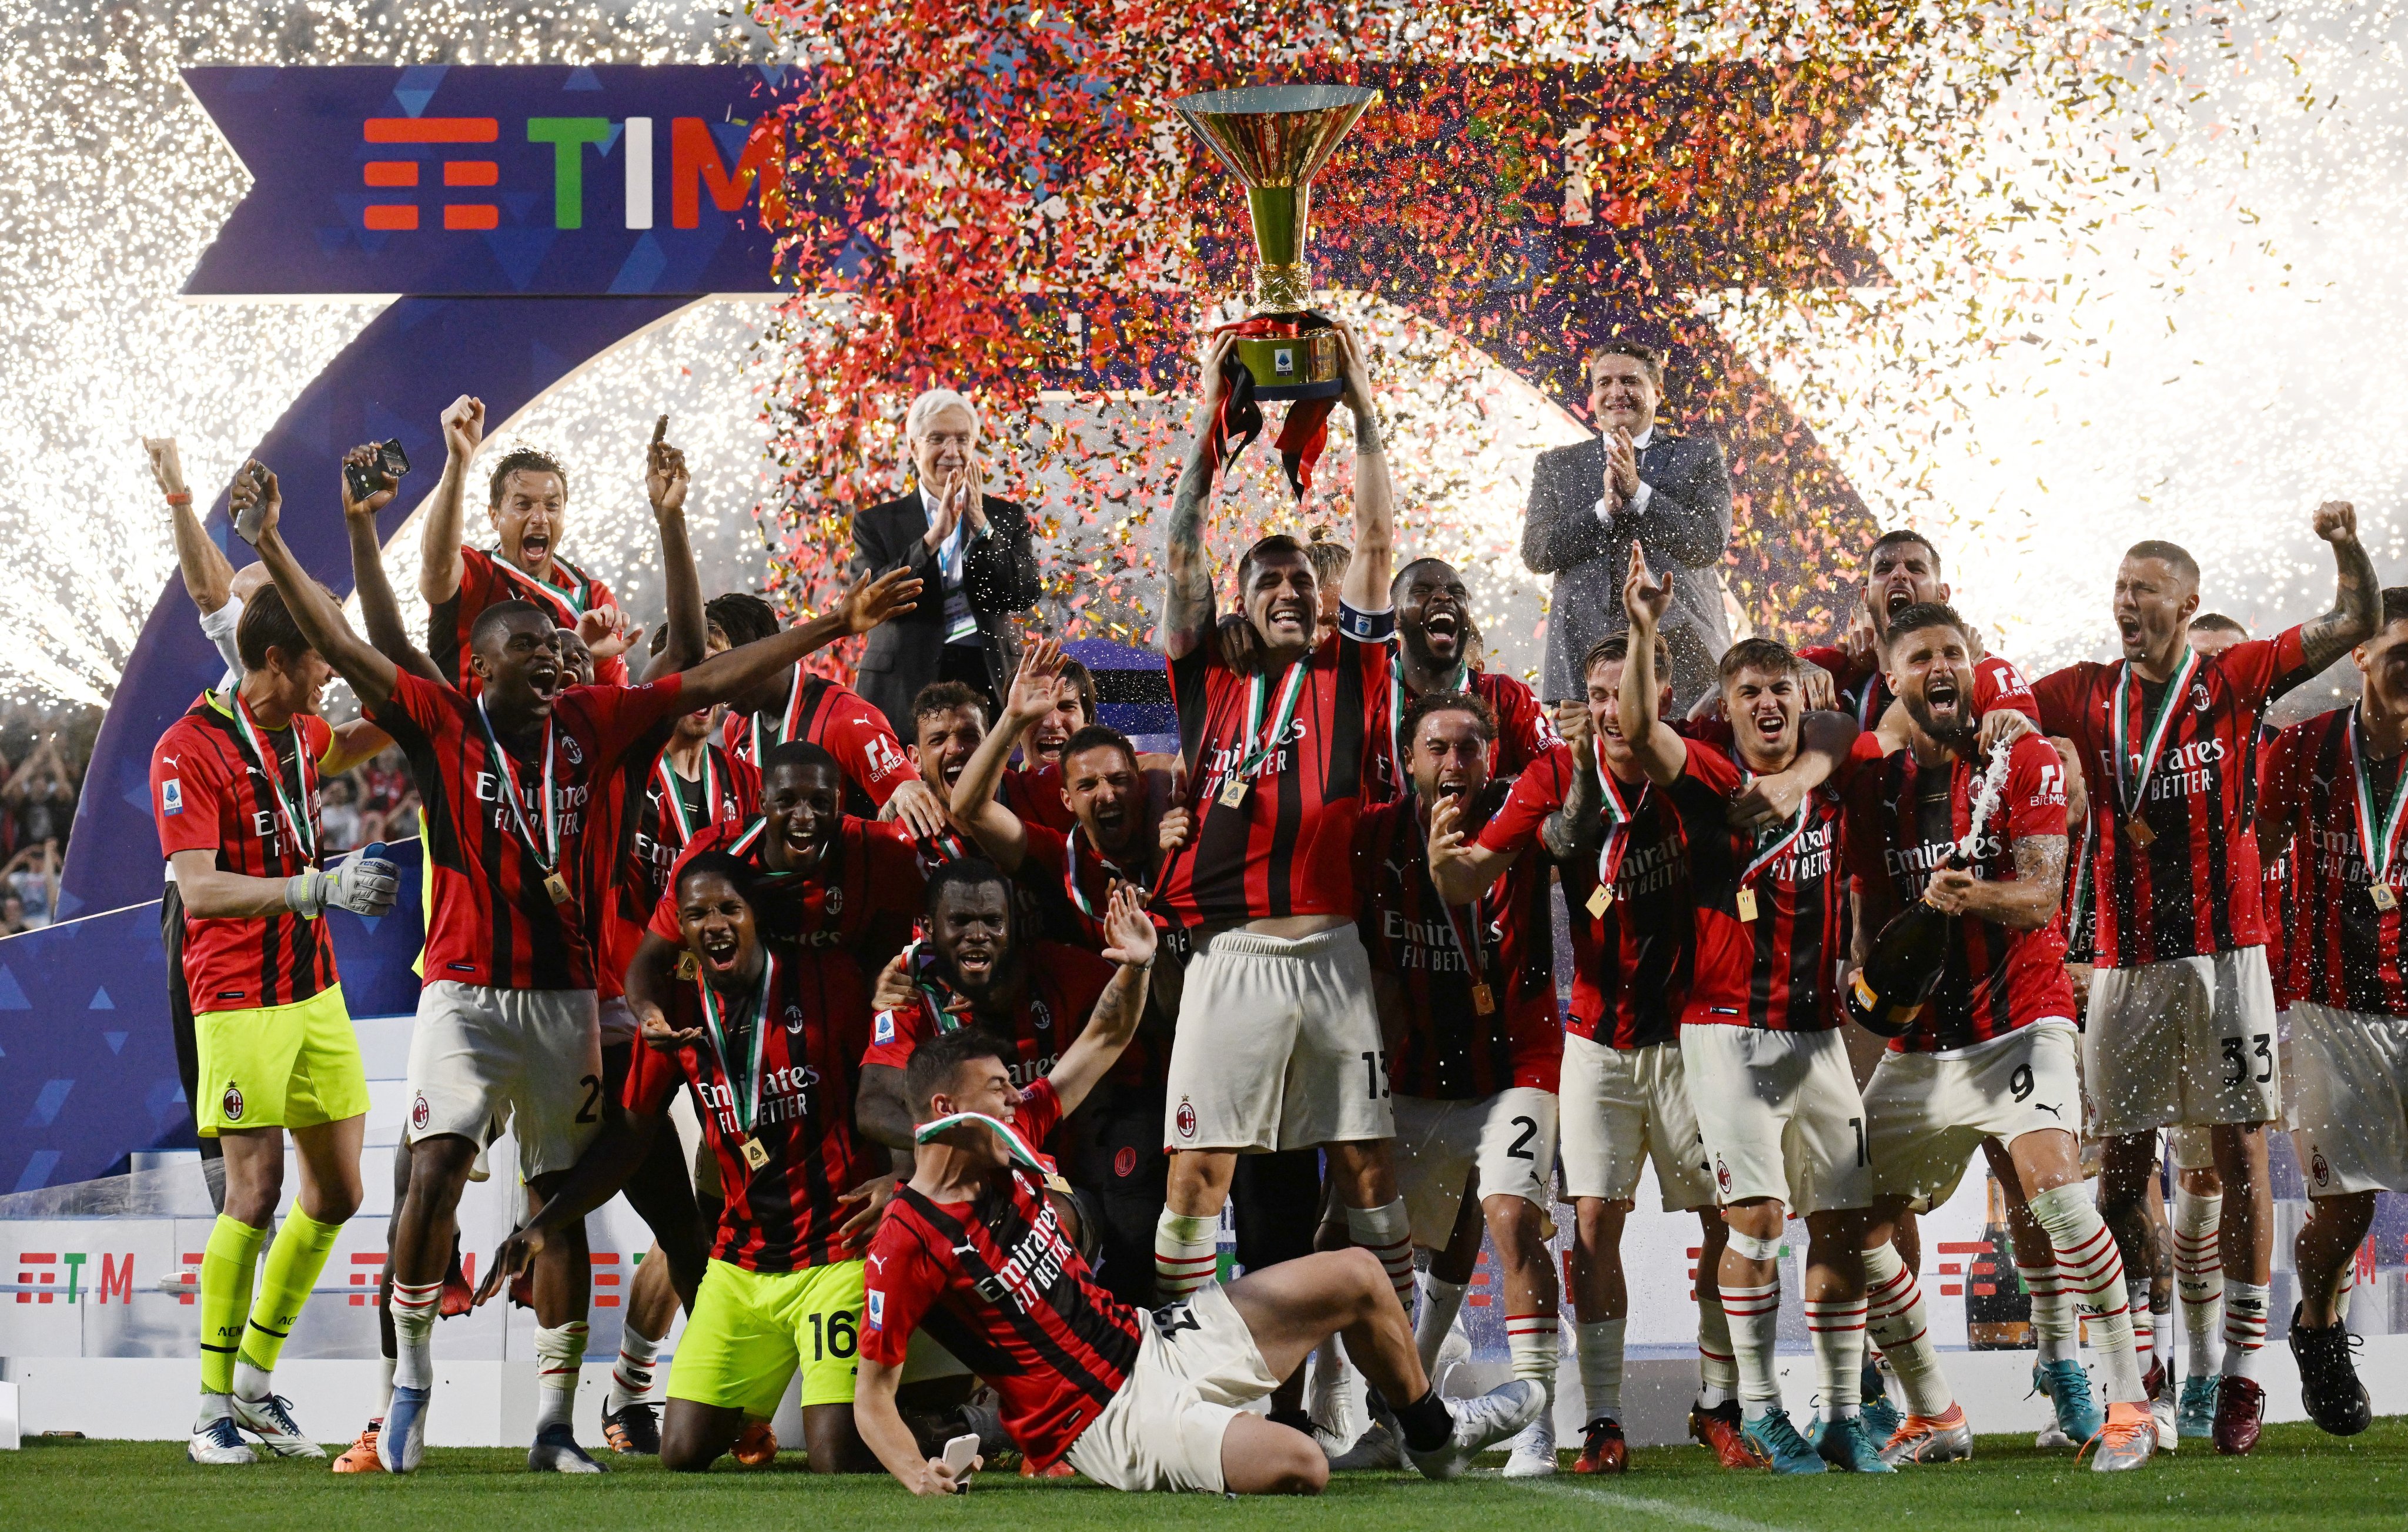 Serie A: Milan win the Serie A title, Rossoneri claim first in years to beat Sassuolo comfortably as Giroud grabs a brace, Watch HIGHLIGHTS - Inside Sport India